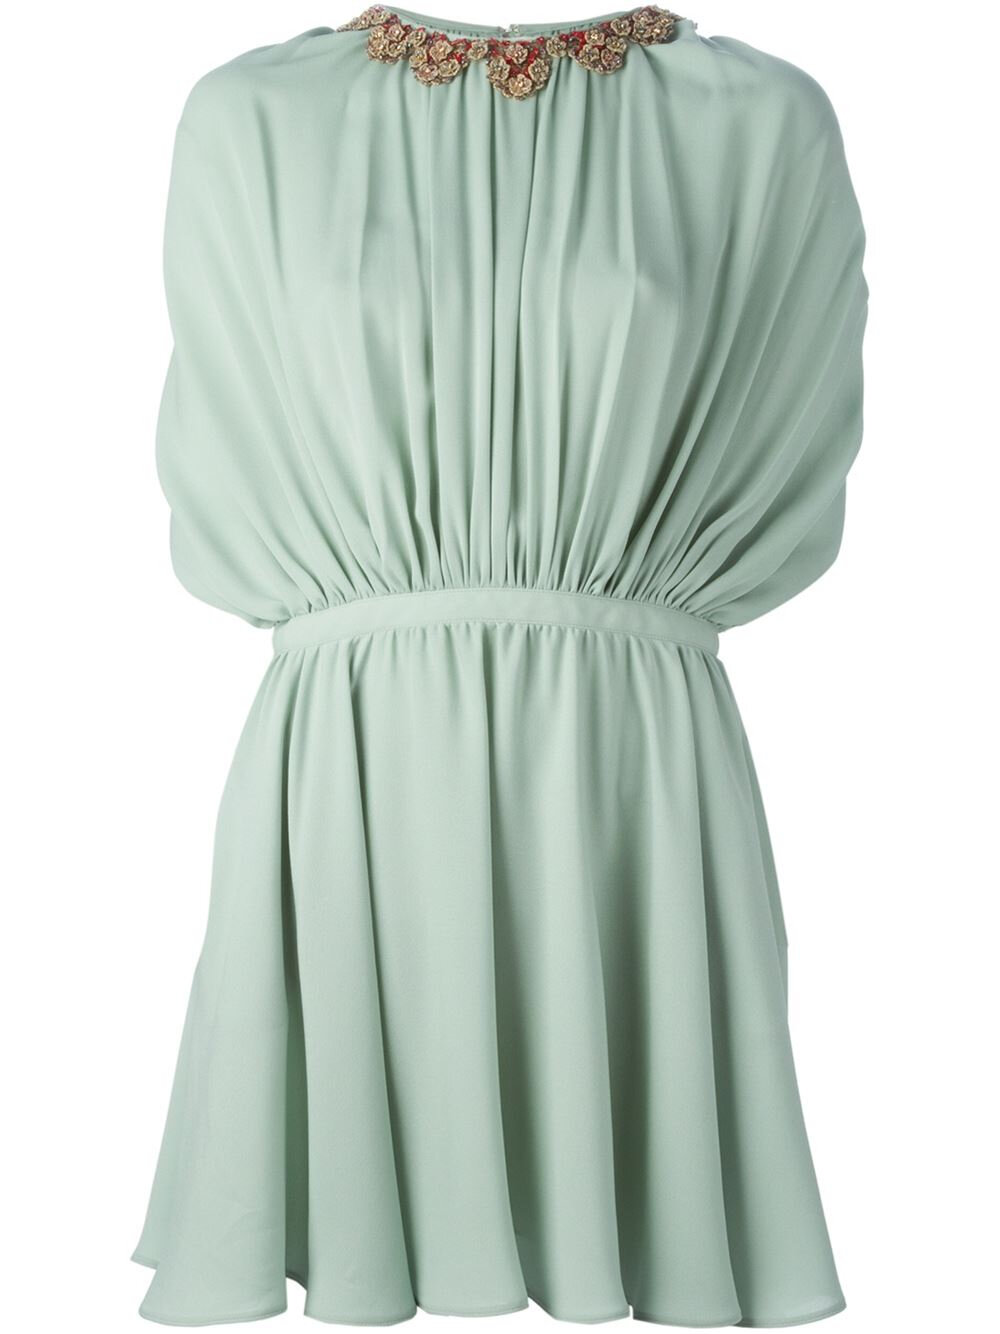 Valentino Silk Dress with Embellished Collar in Mint Green.jpg